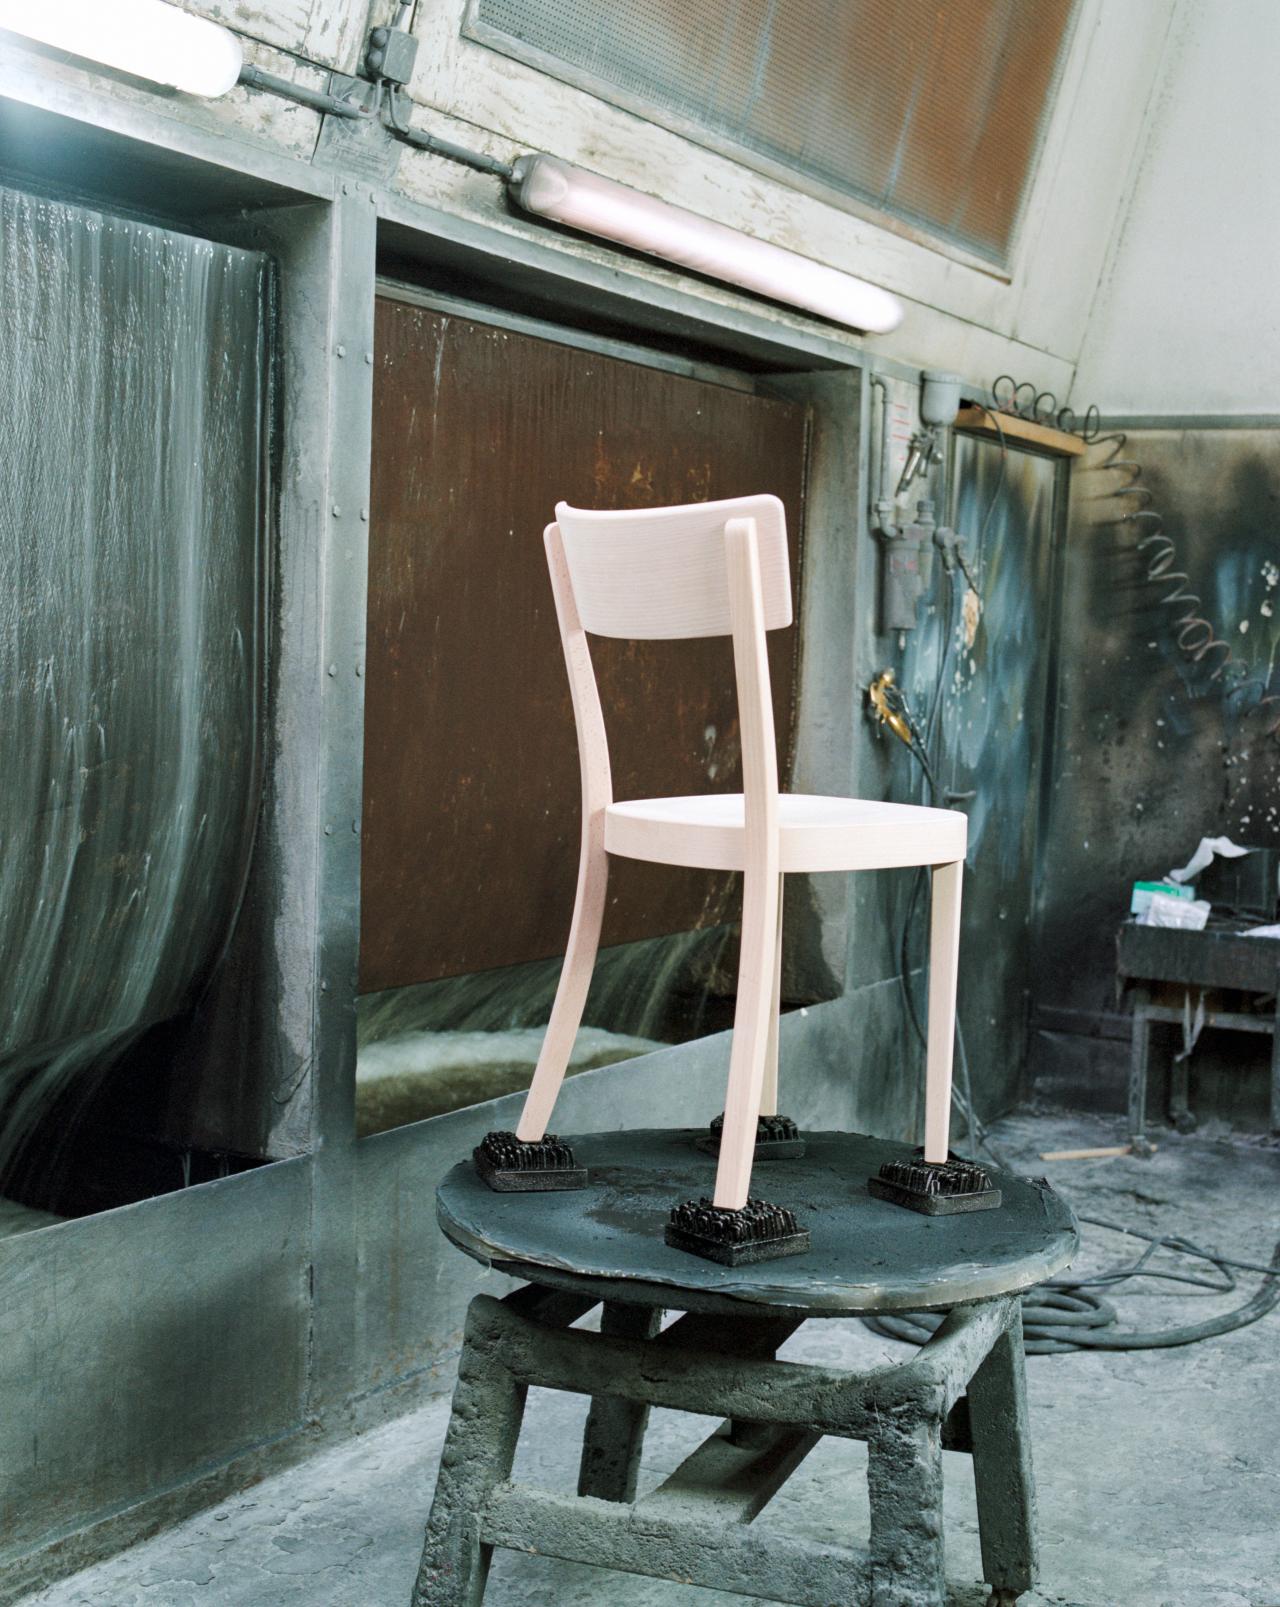 Chair on stool